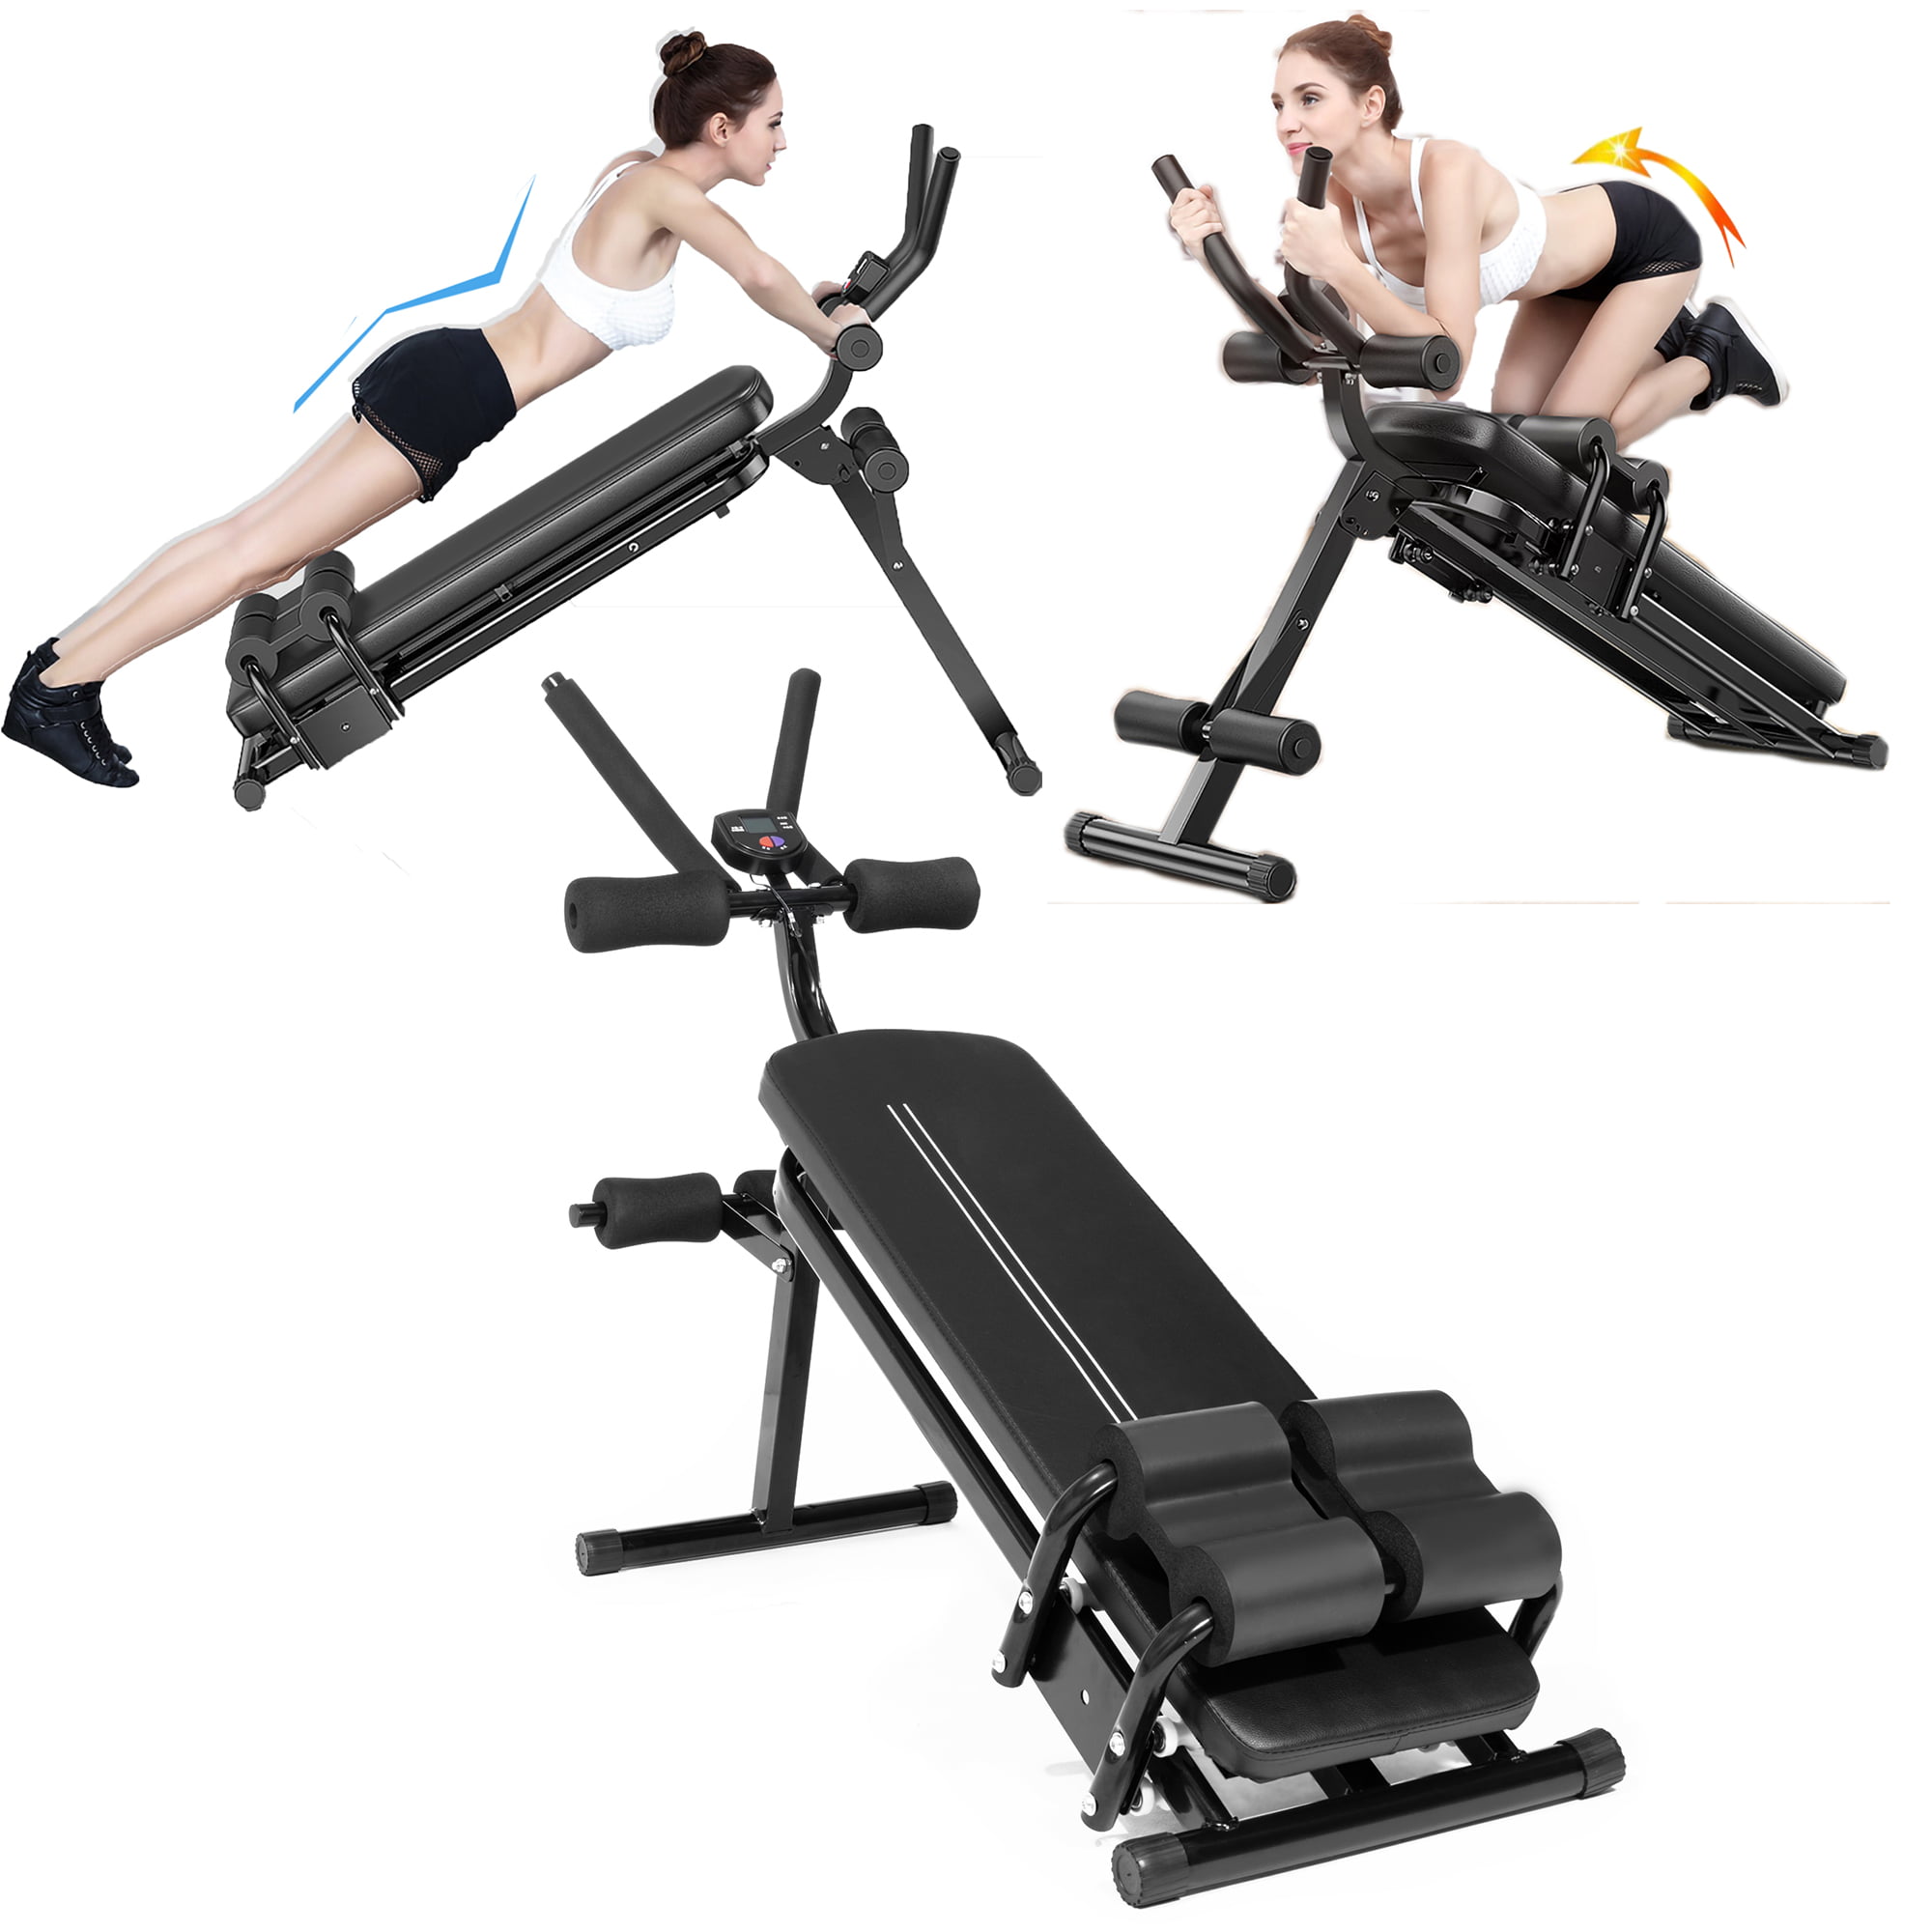 Details about   ADJUSTABLE DECLINE INCLINE HOME GYM WEIGHT BENCH SIT UP ABDOMINAL AB FITNESS FID 